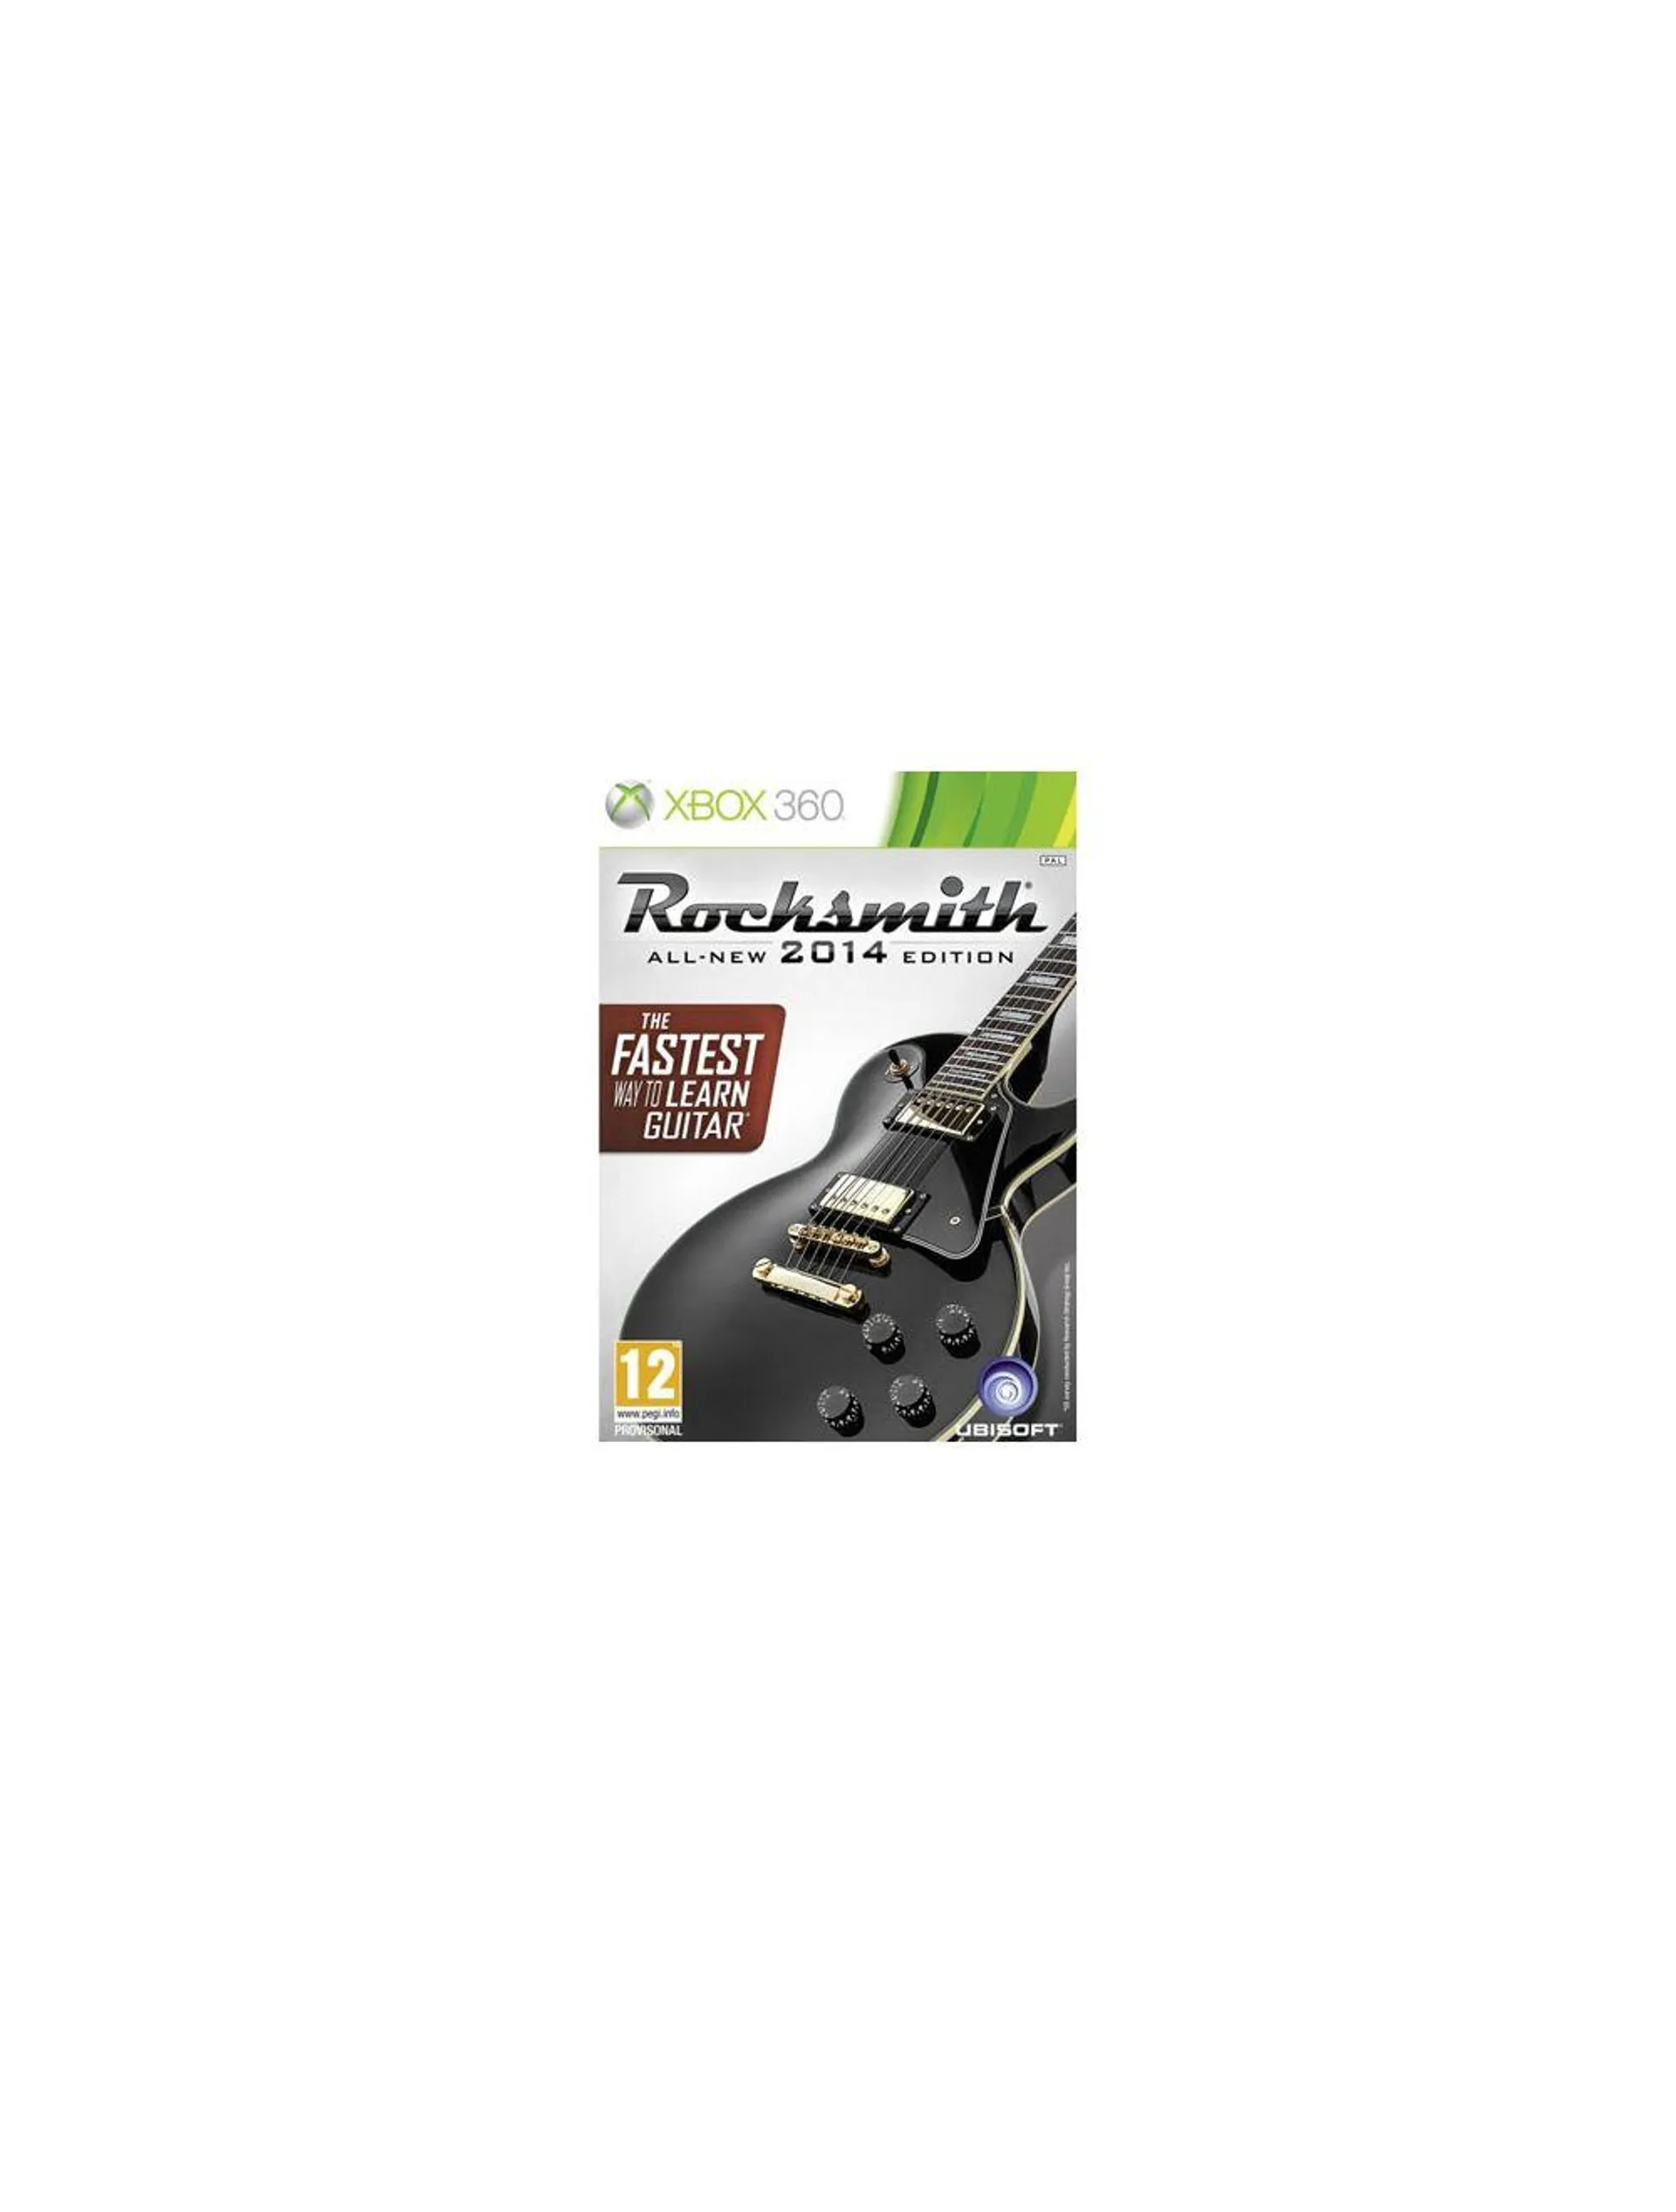 Rocksmith All New 2014 Edition No Incluye Cable Xbox 360